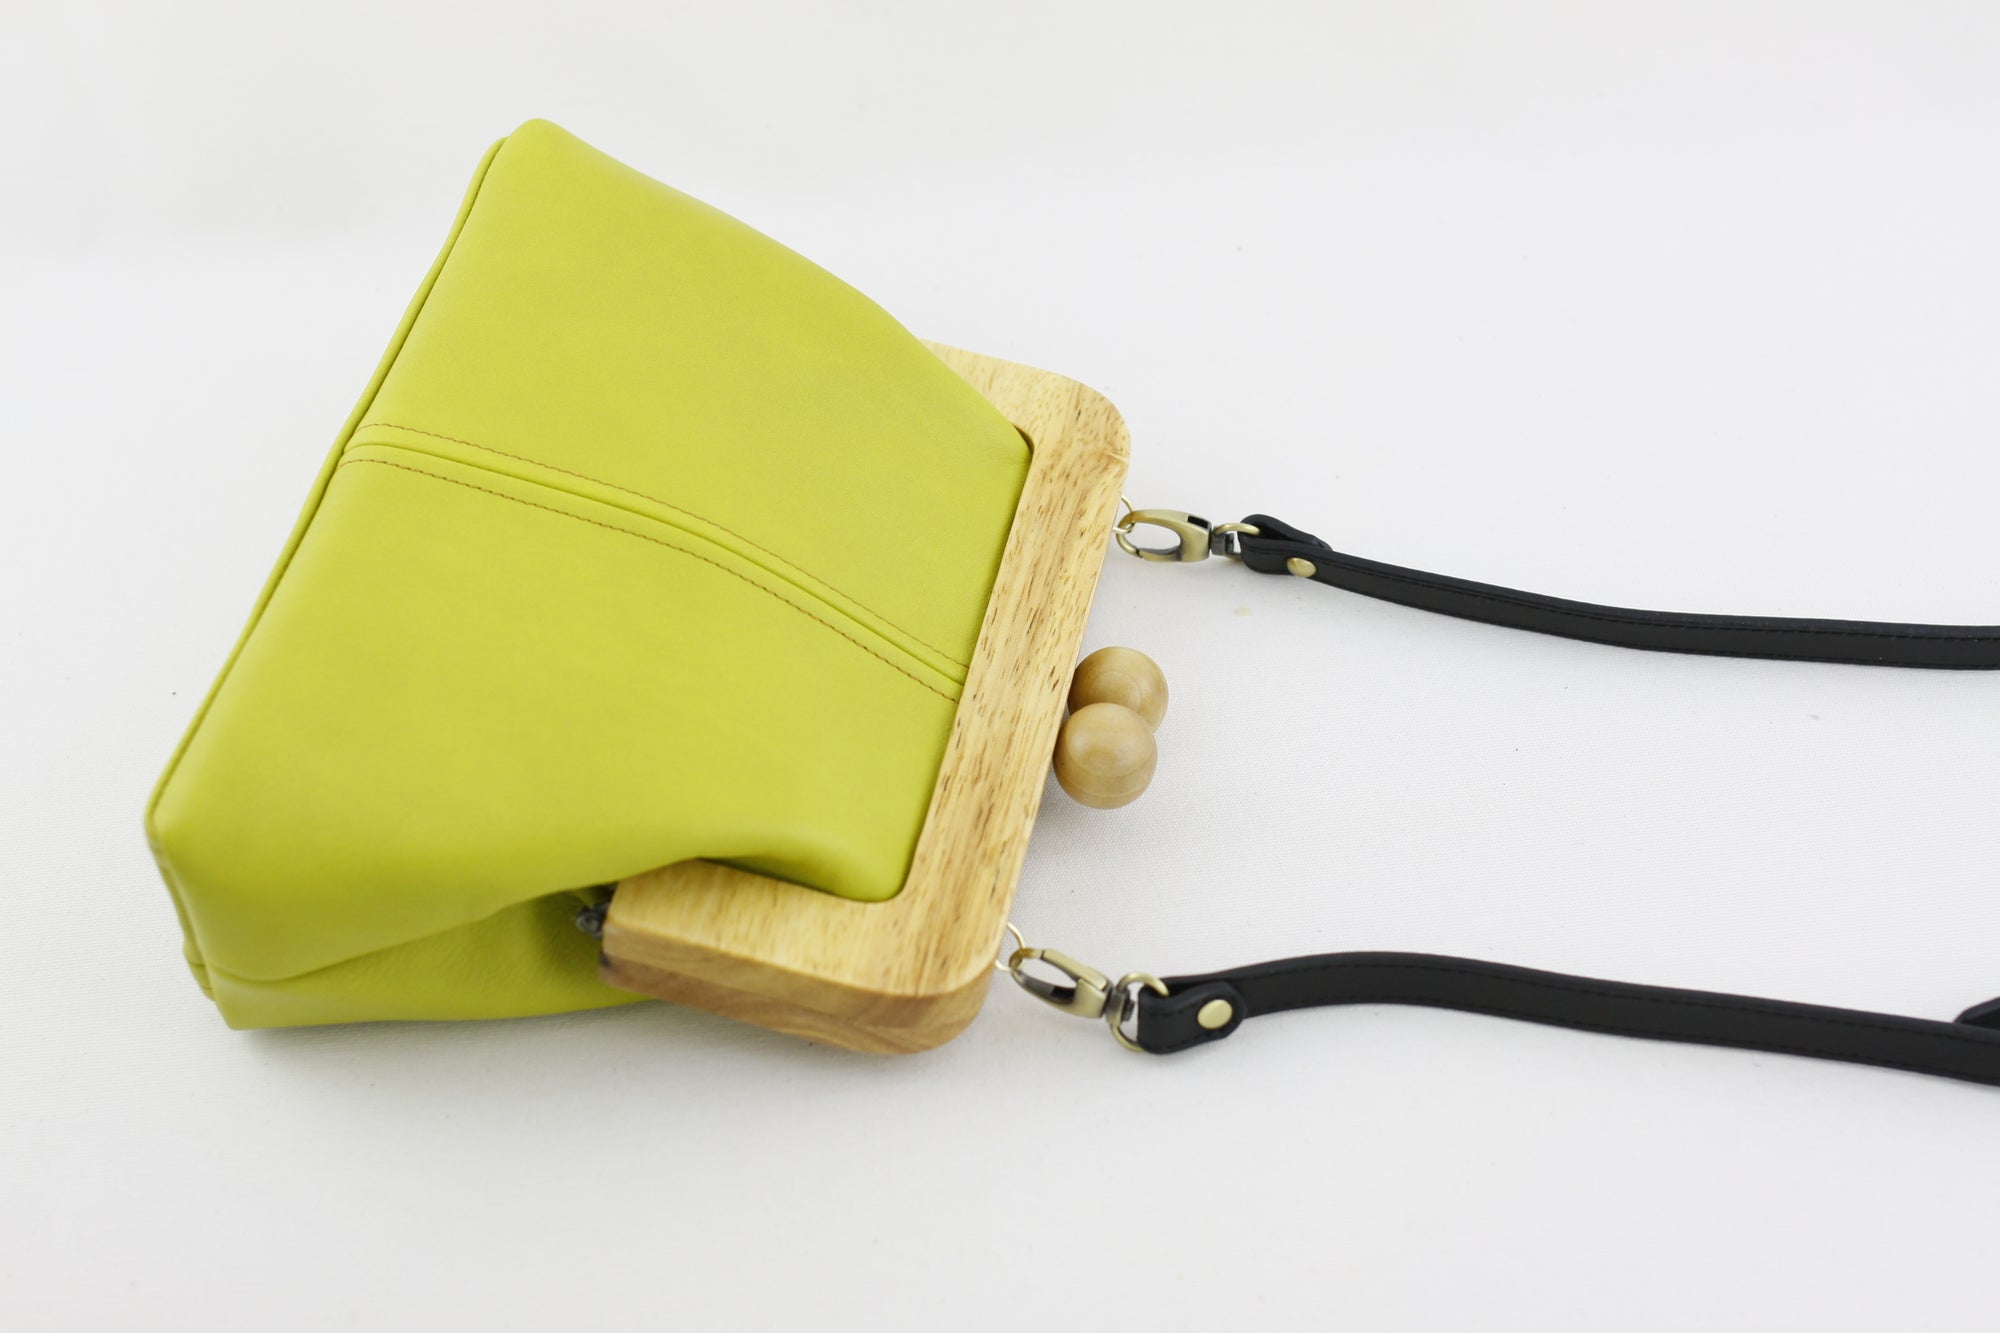 Women's Green Genuine Leather Clutch Bag with Strap | PINKOASIS